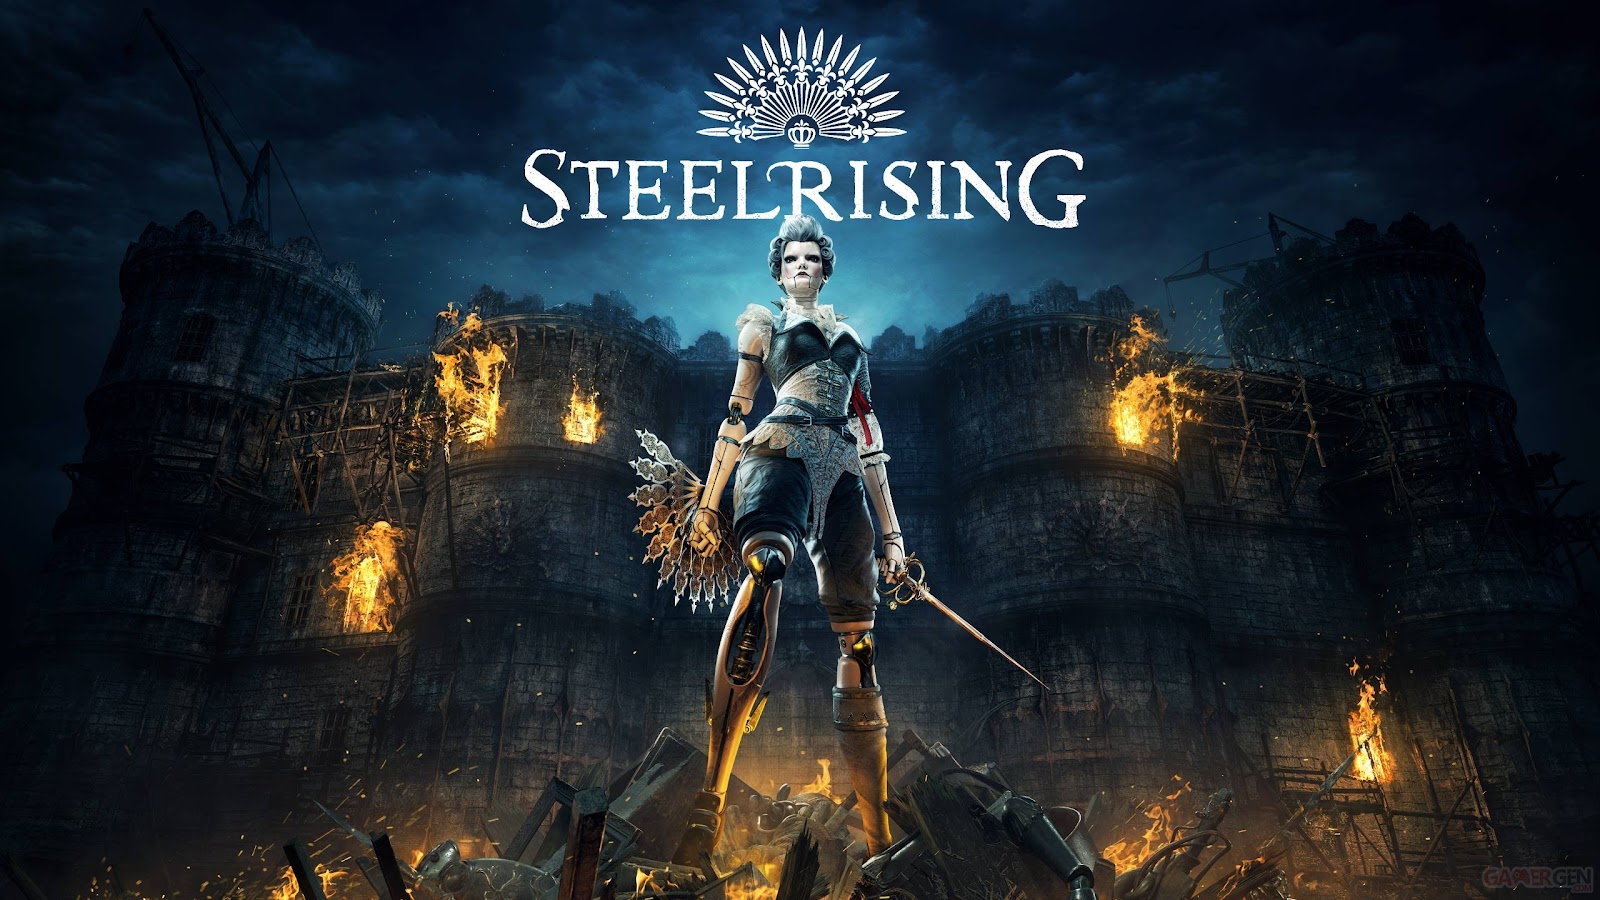 Free Download_Steelrising_Torrent_One Link_Several Parts